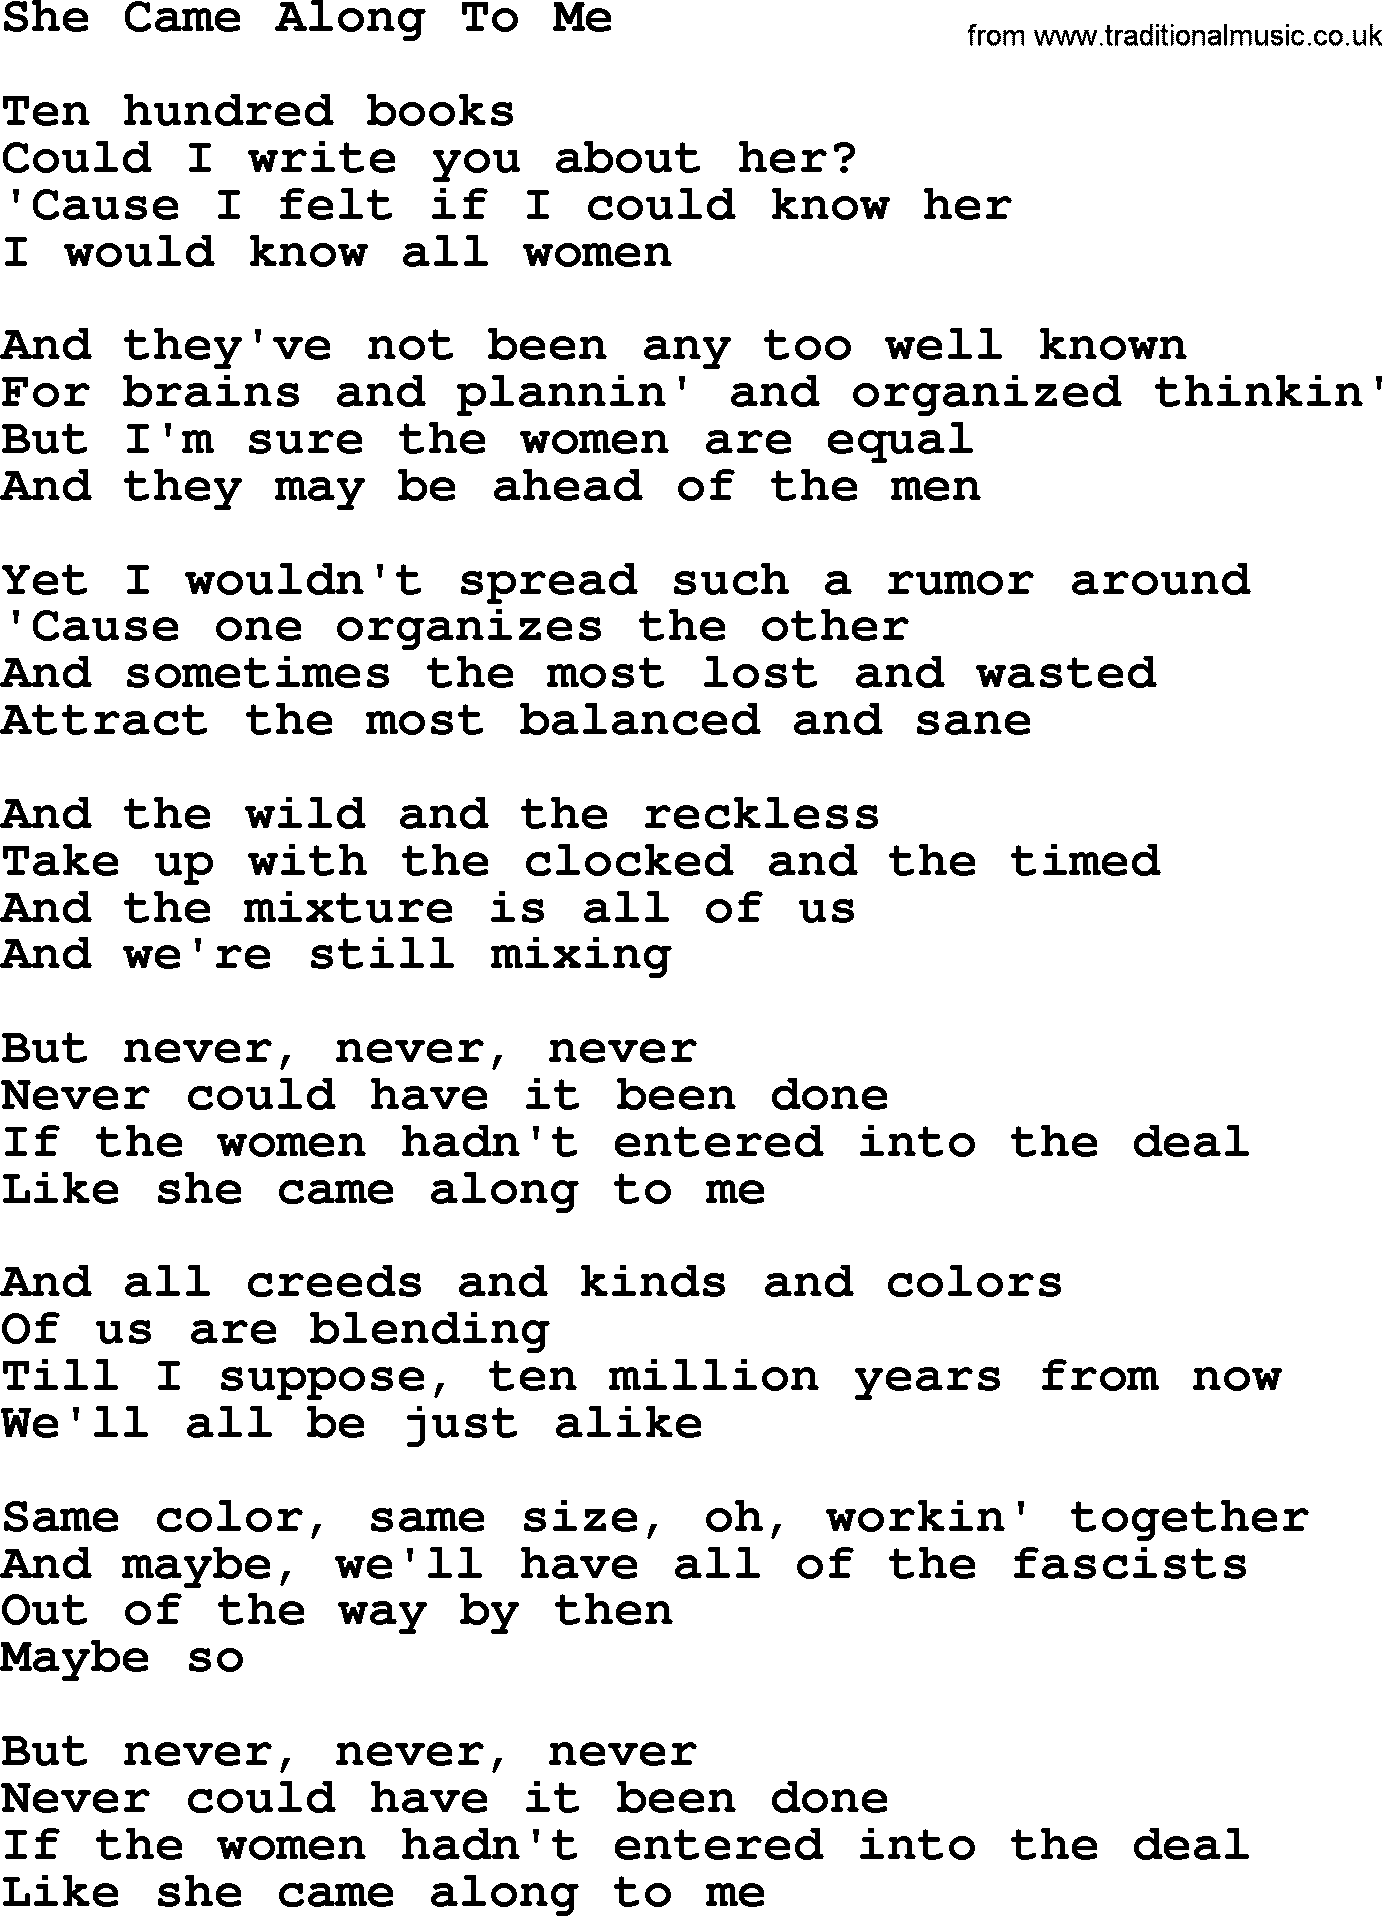 Woody Guthrie song She Came Along To Me lyrics